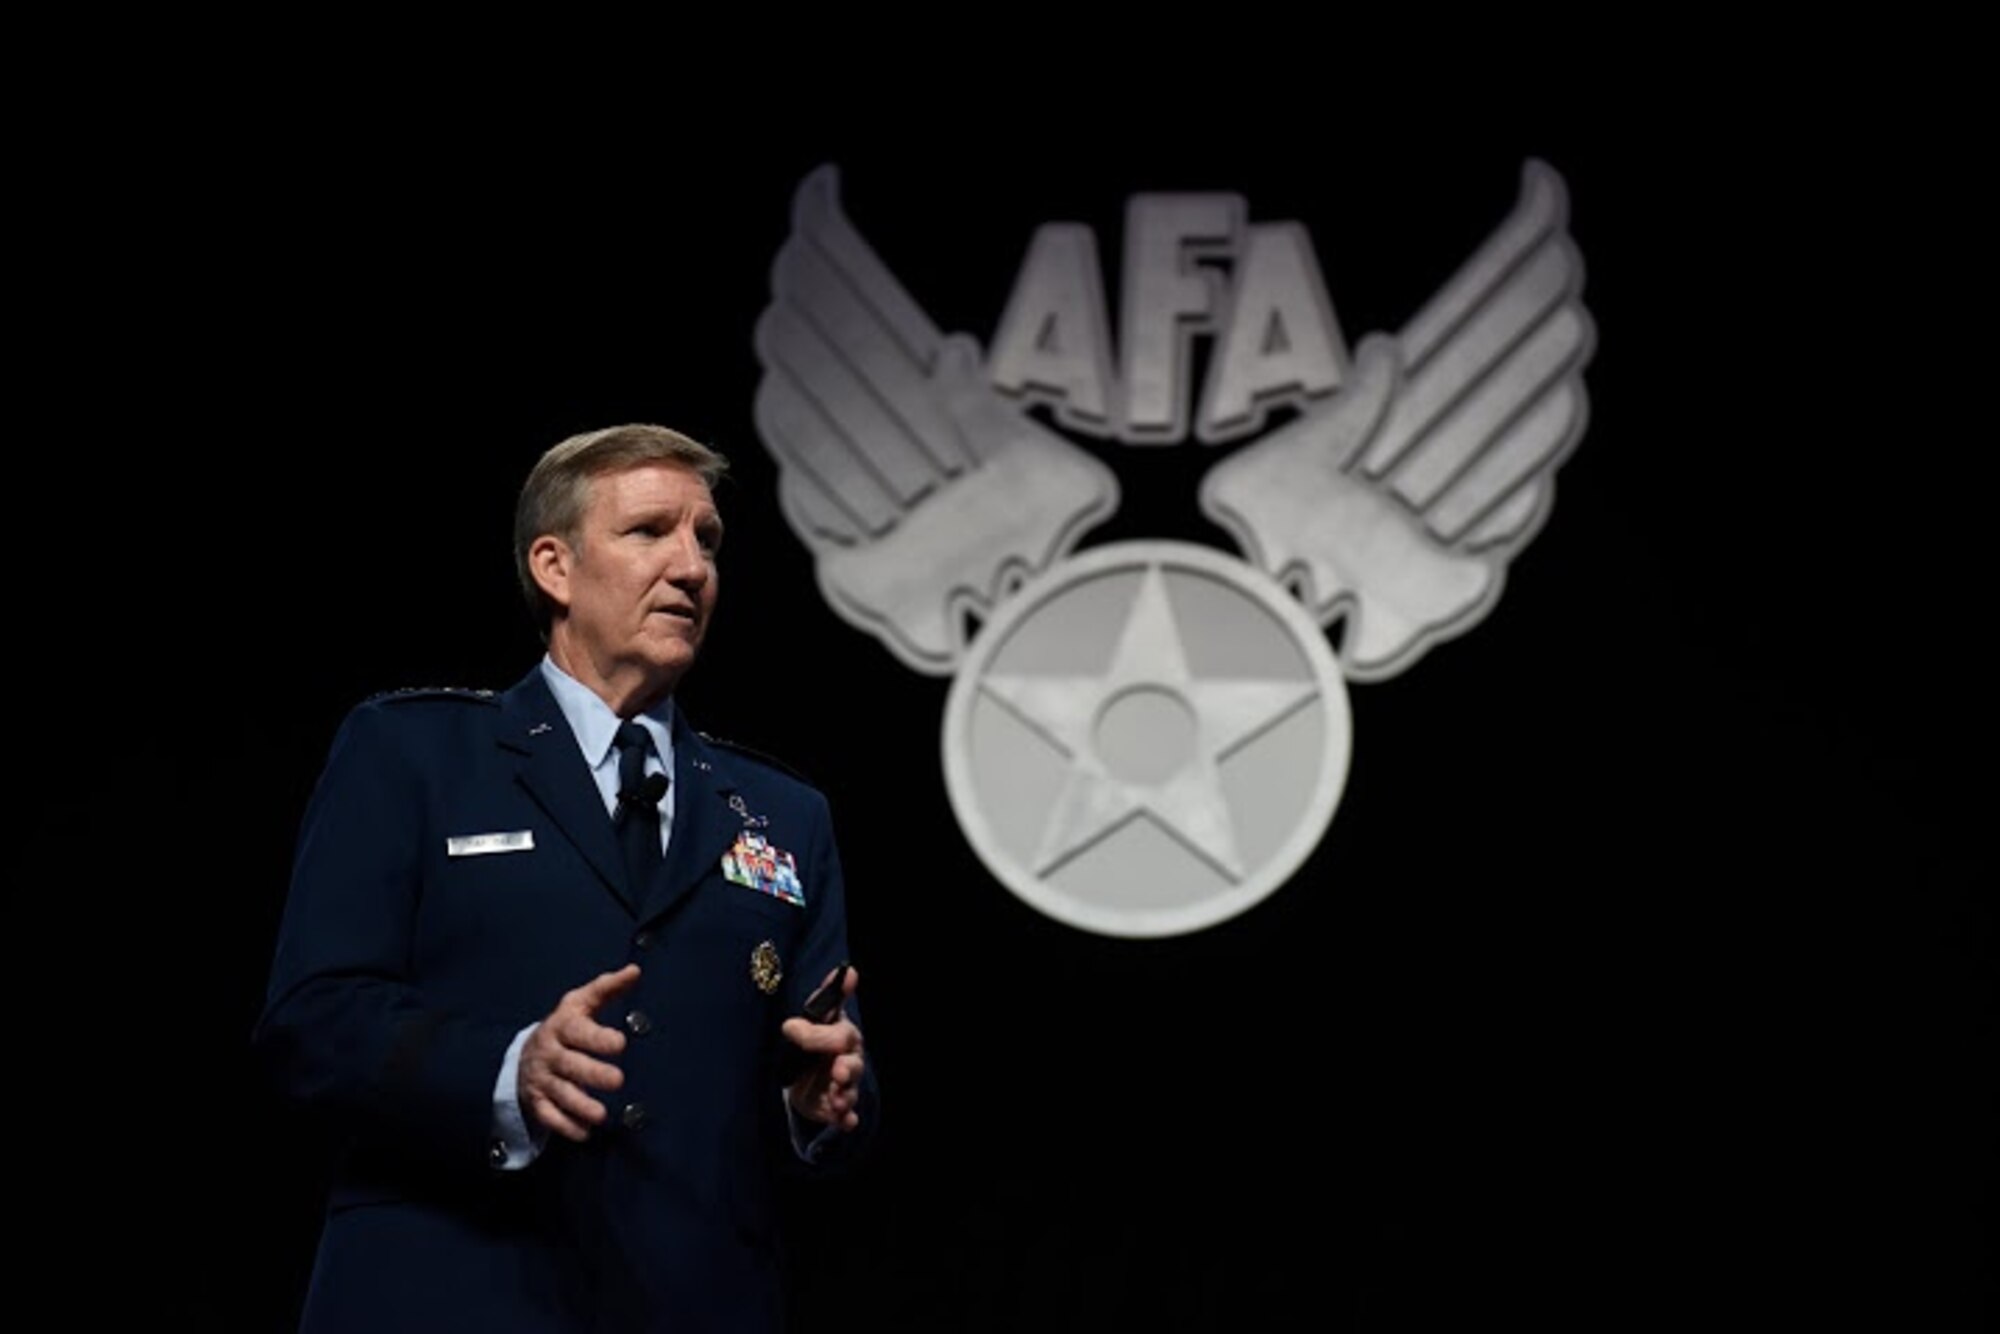 Gen. Hawk Carlisle, the Air Combat Command commander, talks about the 5th generation warfare during the Air Force Association Air and Space Conference and Technology Exposition in Washington, D.C., Sept. 15, 2015. The AFA conference brought together Air Force leadership, industry experts, scholars and current aerospace specialists from around the world to discuss the issues and challenges facing the U.S. and the aerospace community today.  (Air Force photo /Tech. Sgt. Dan DeCook) 